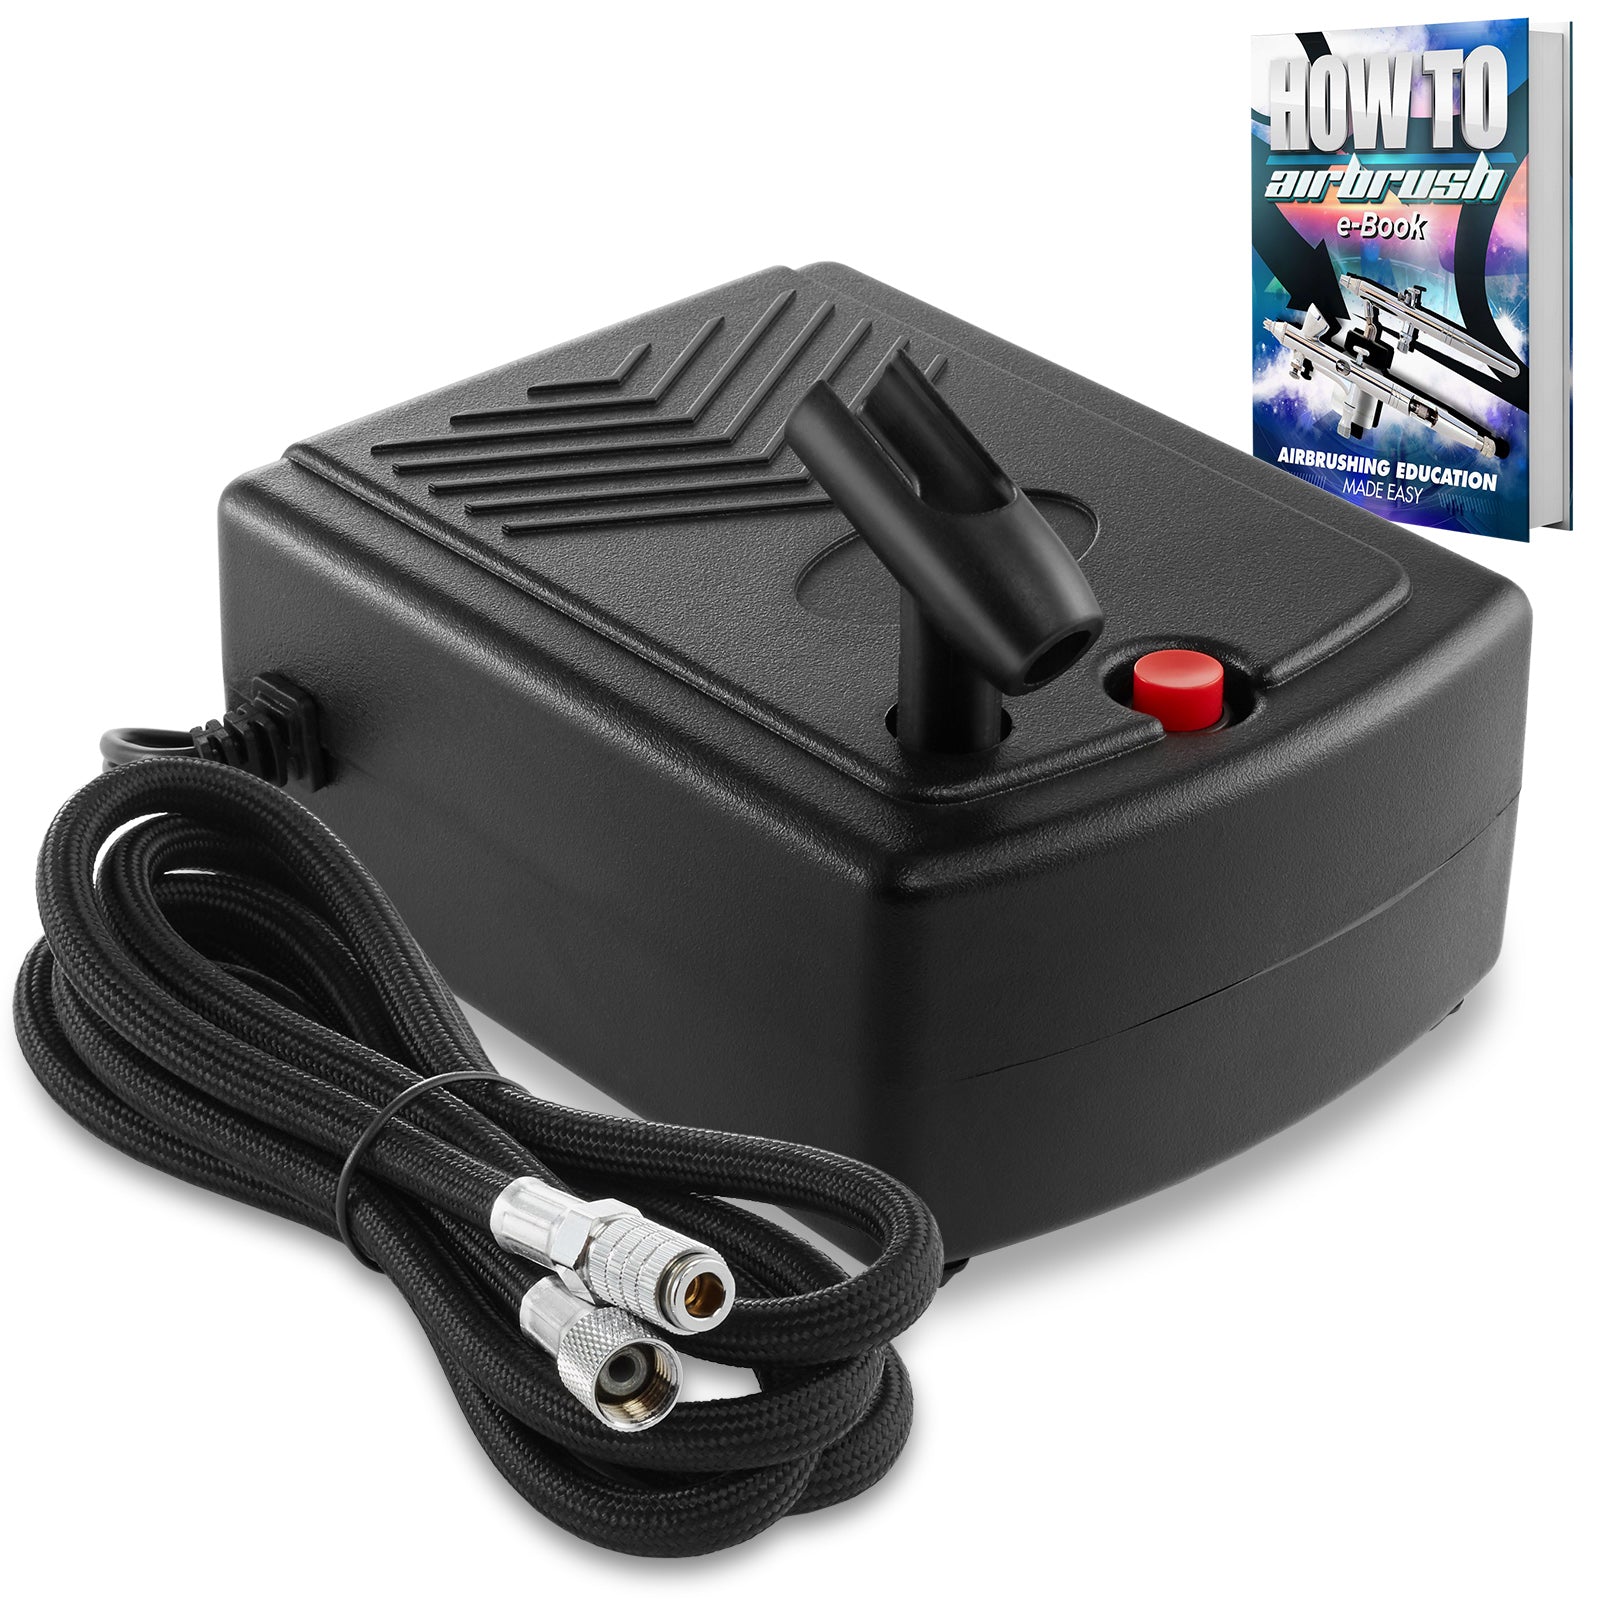 Pointzero Mini Airbrush Compressor with Holder and 6 ft. Hose - Quiet Portable Air Pump